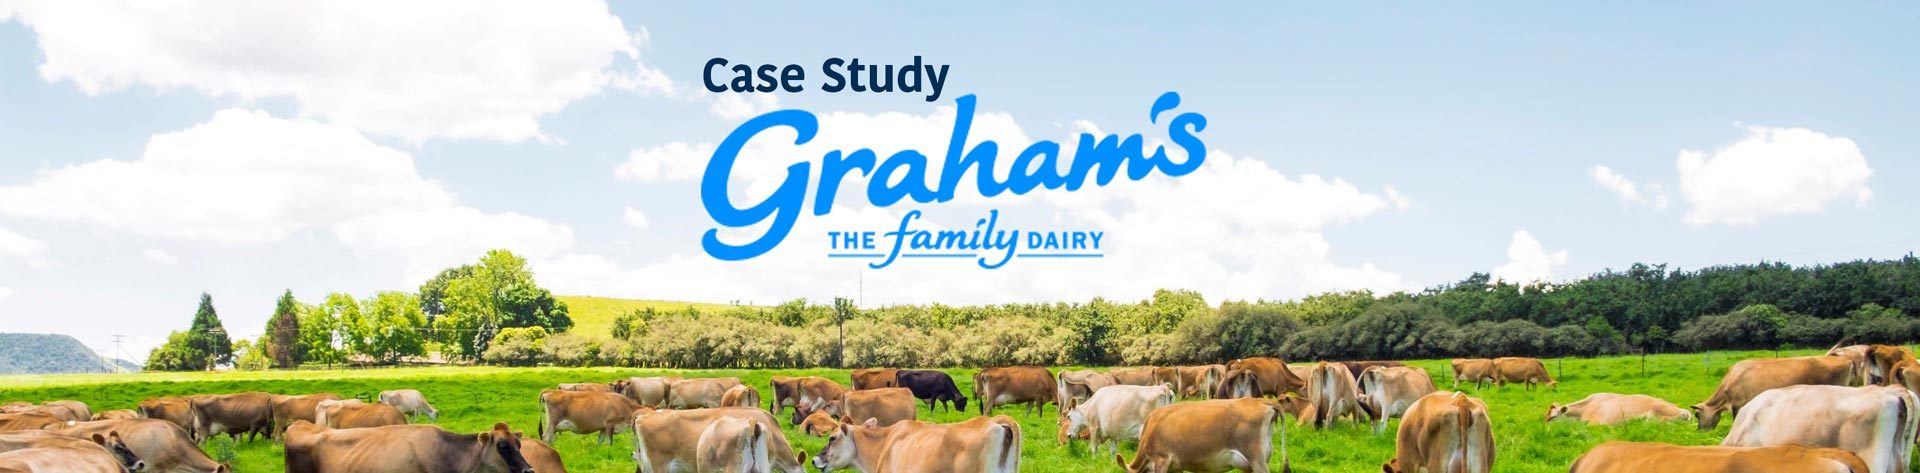 grahams the family dairy article optimize farm operations